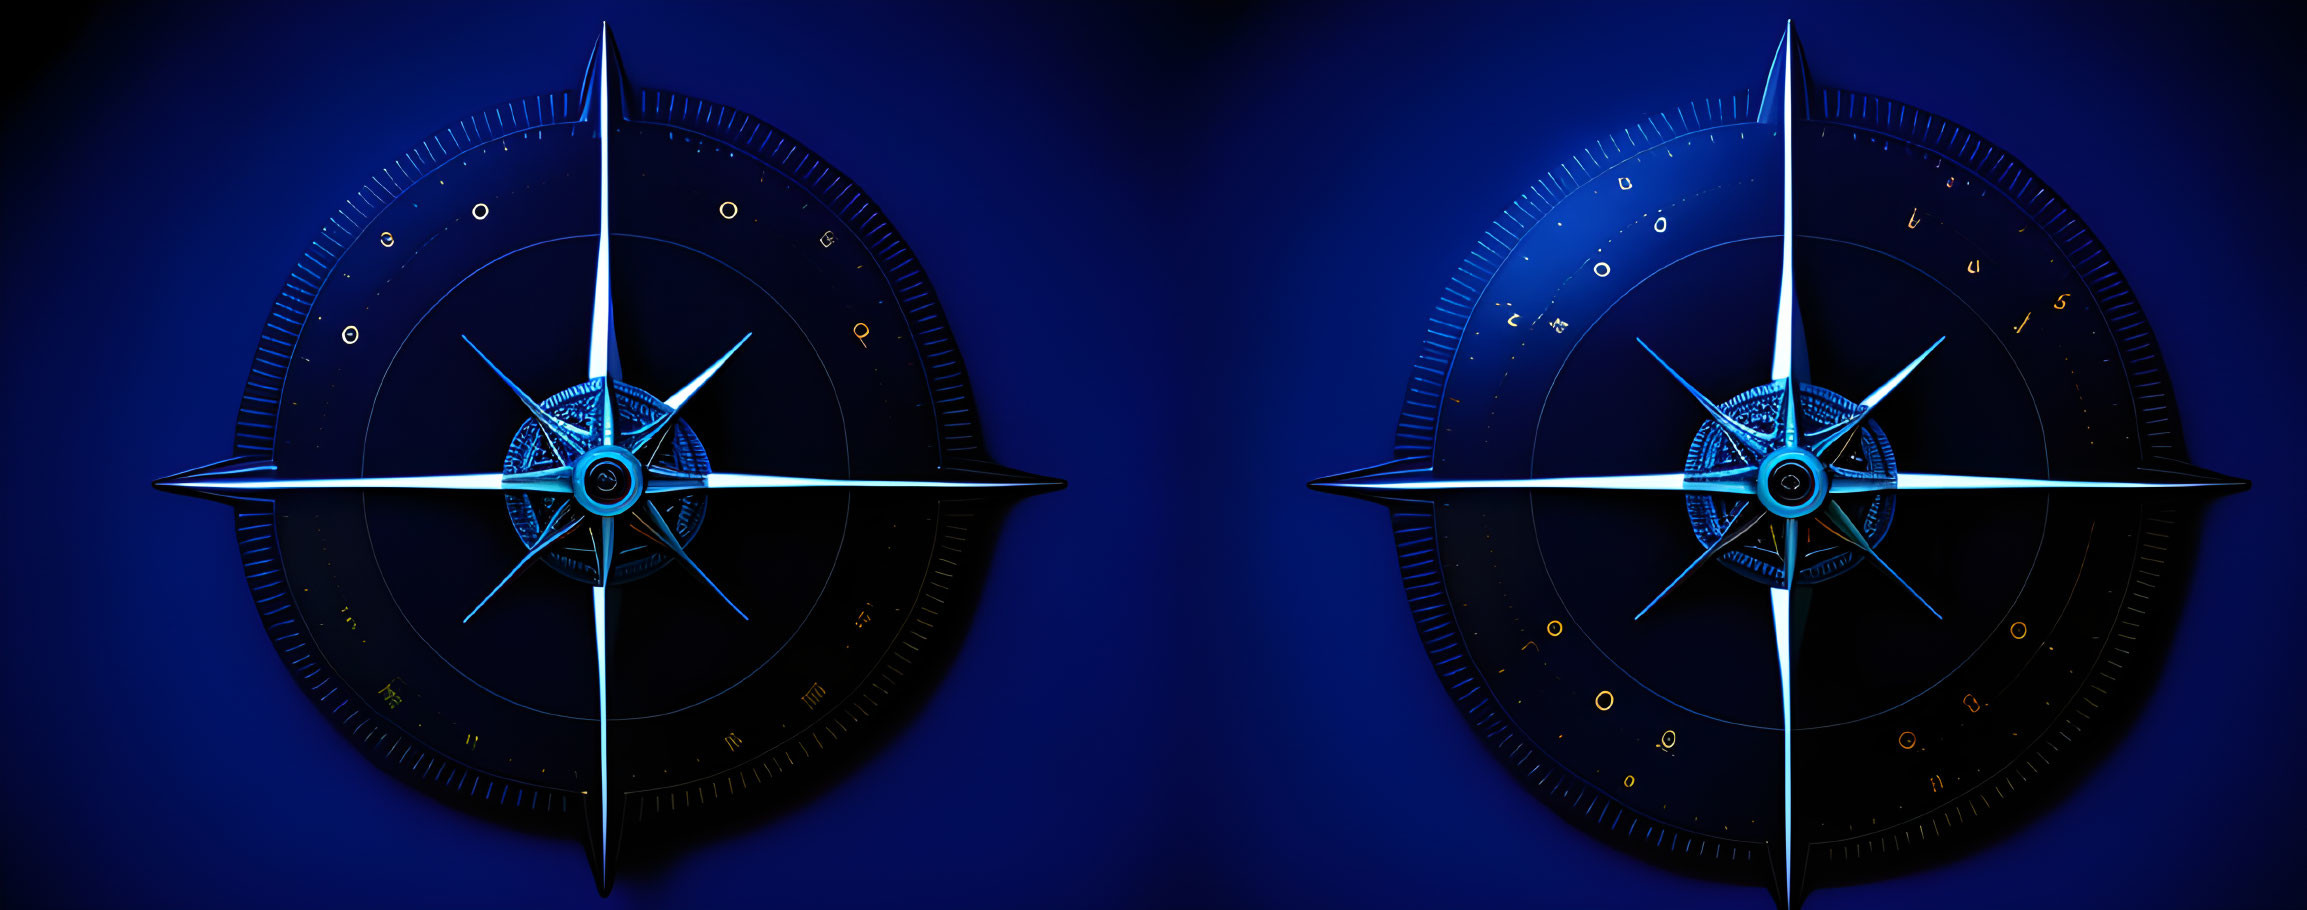 Luminous compass on dark blue background with directional markers